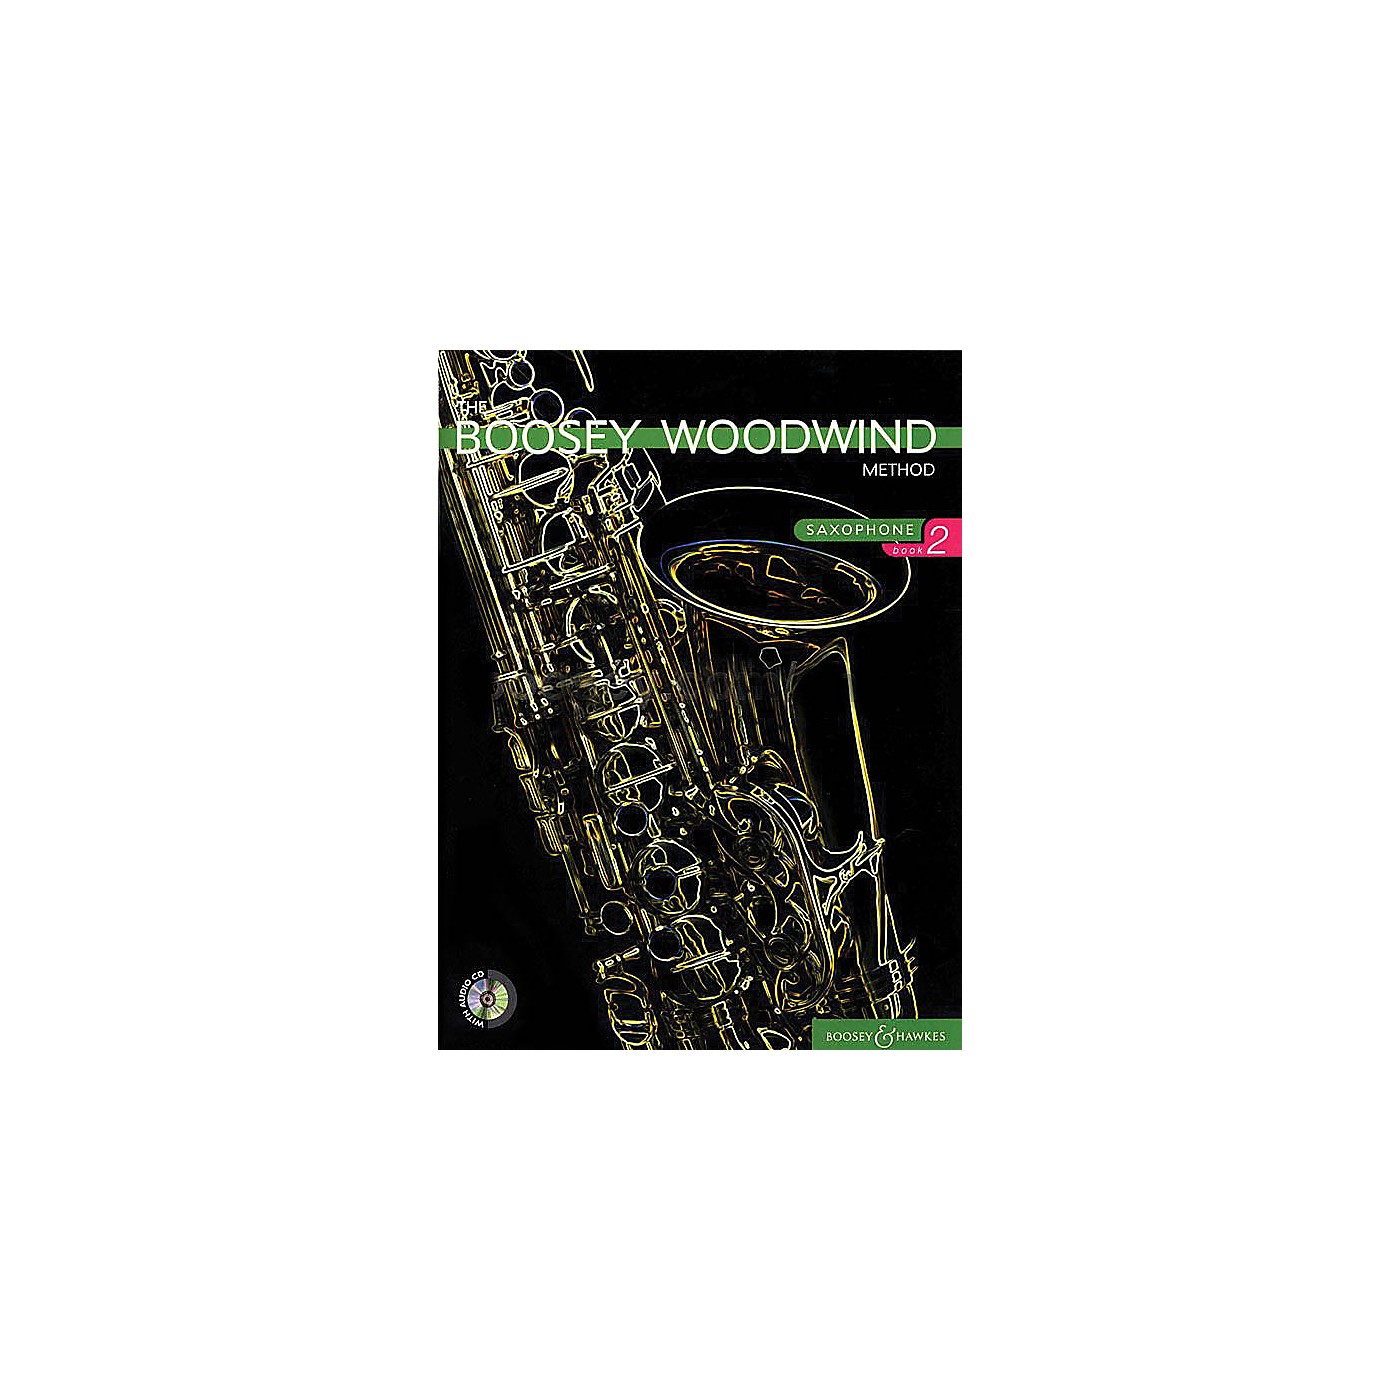 Boosey and Hawkes The Boosey Woodwind Method (Saxophone - Book 2) Concert Band Composed by Various Arranged by Chris Morgan thumbnail